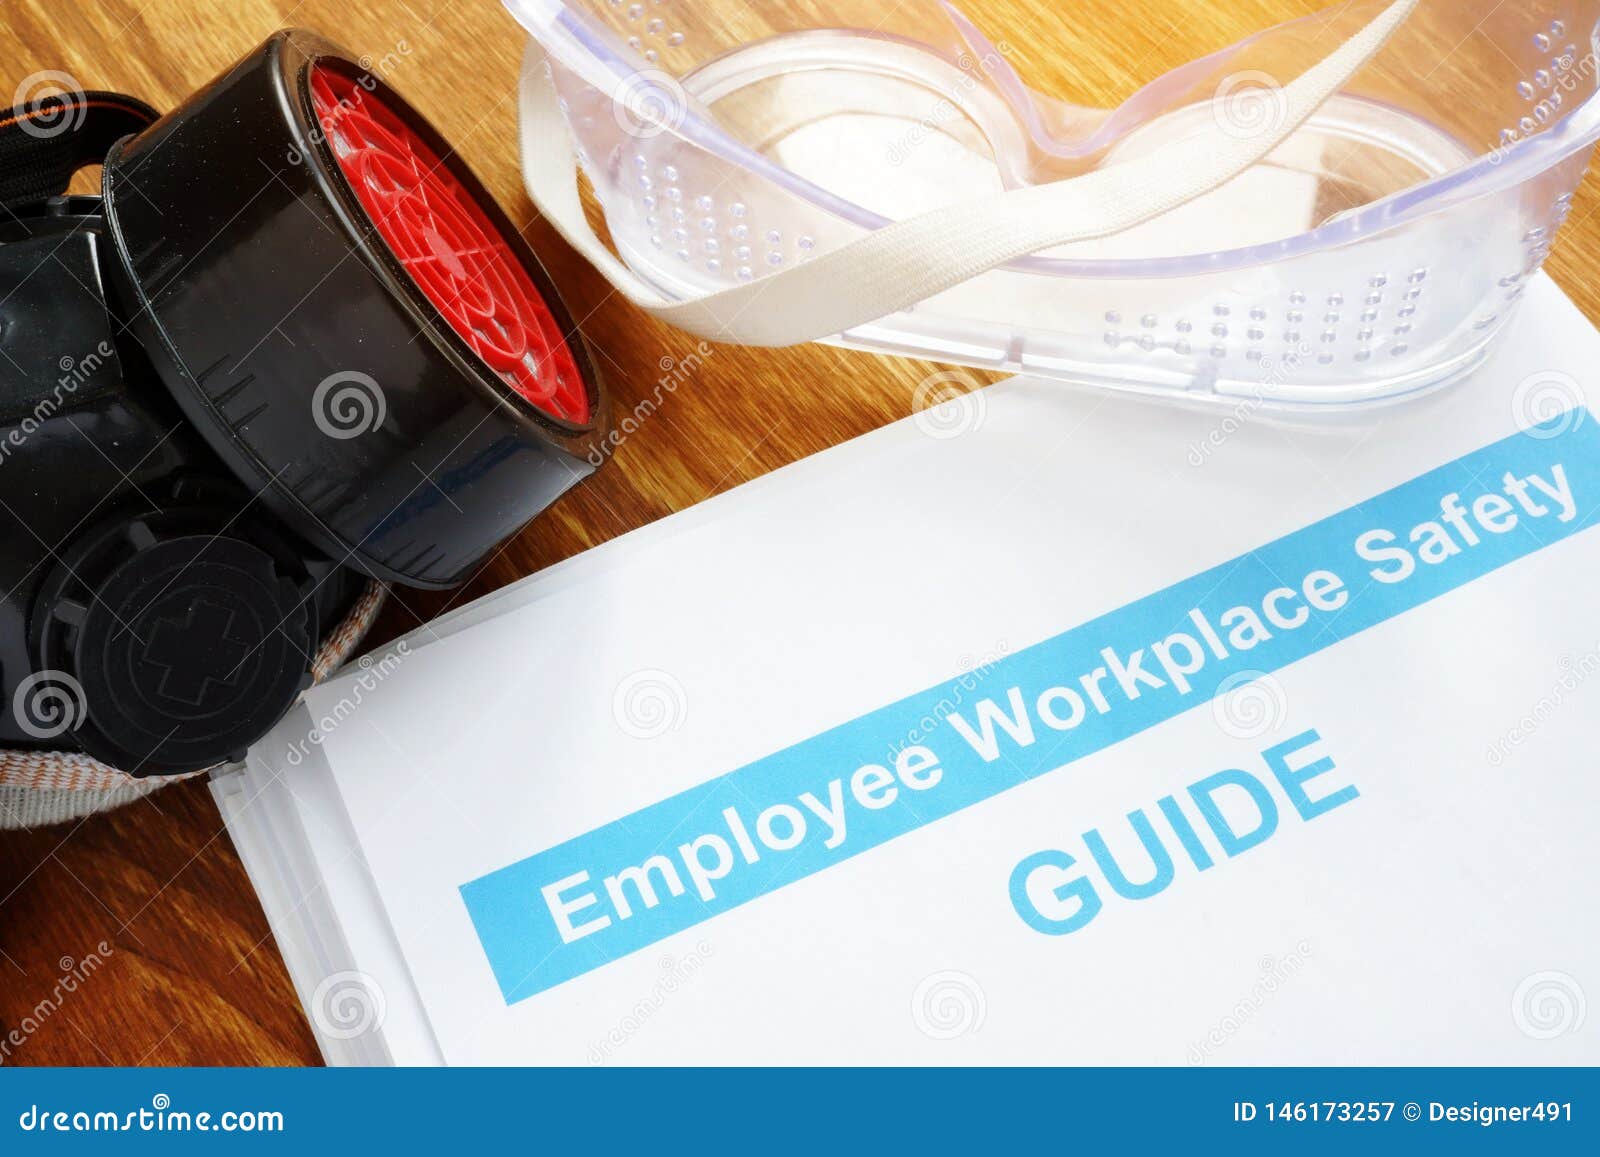 employee workplace safety guide on desk